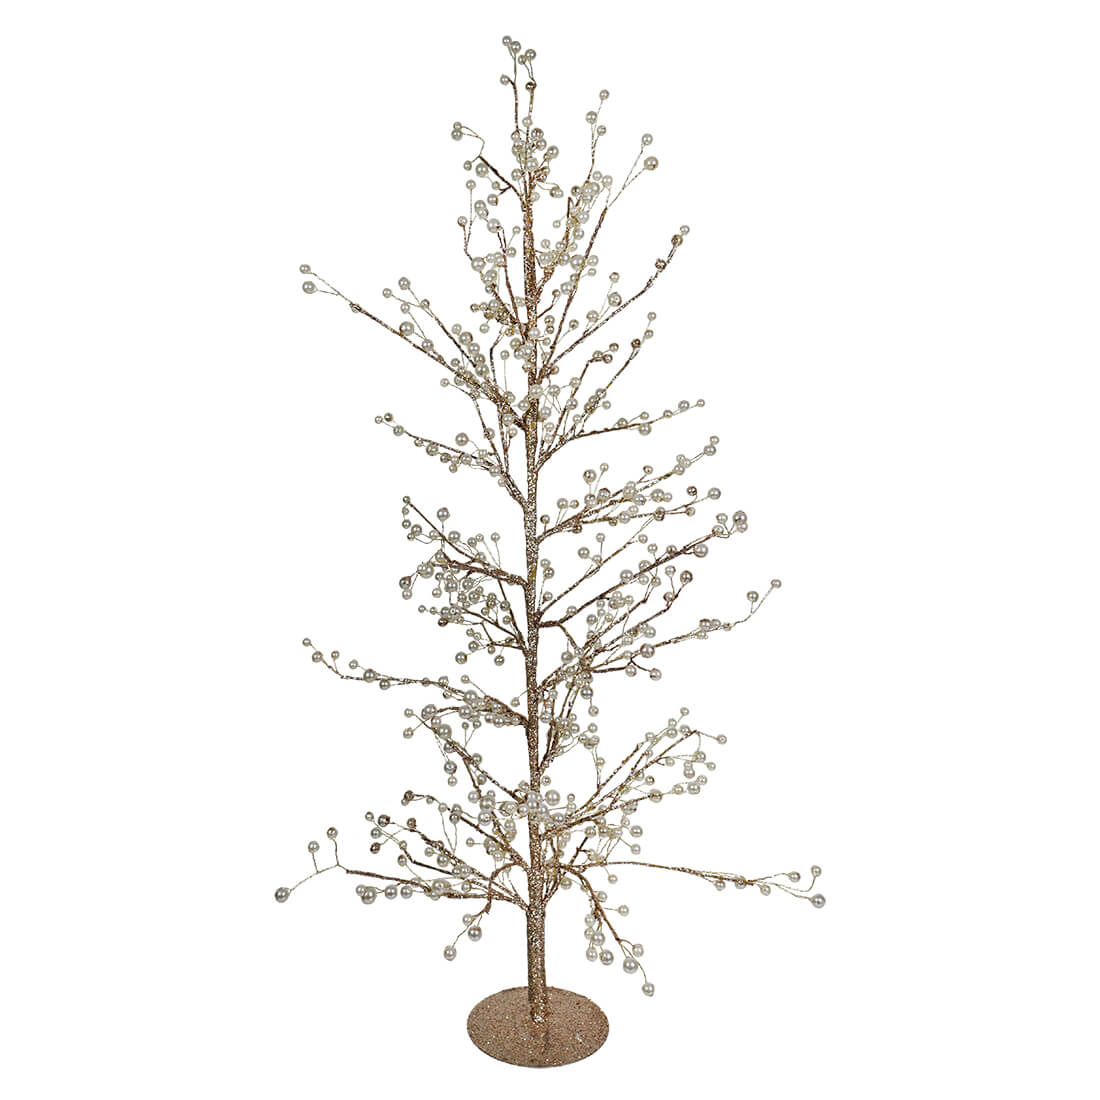 33" Gold Glittered Twig Tree With Pearls